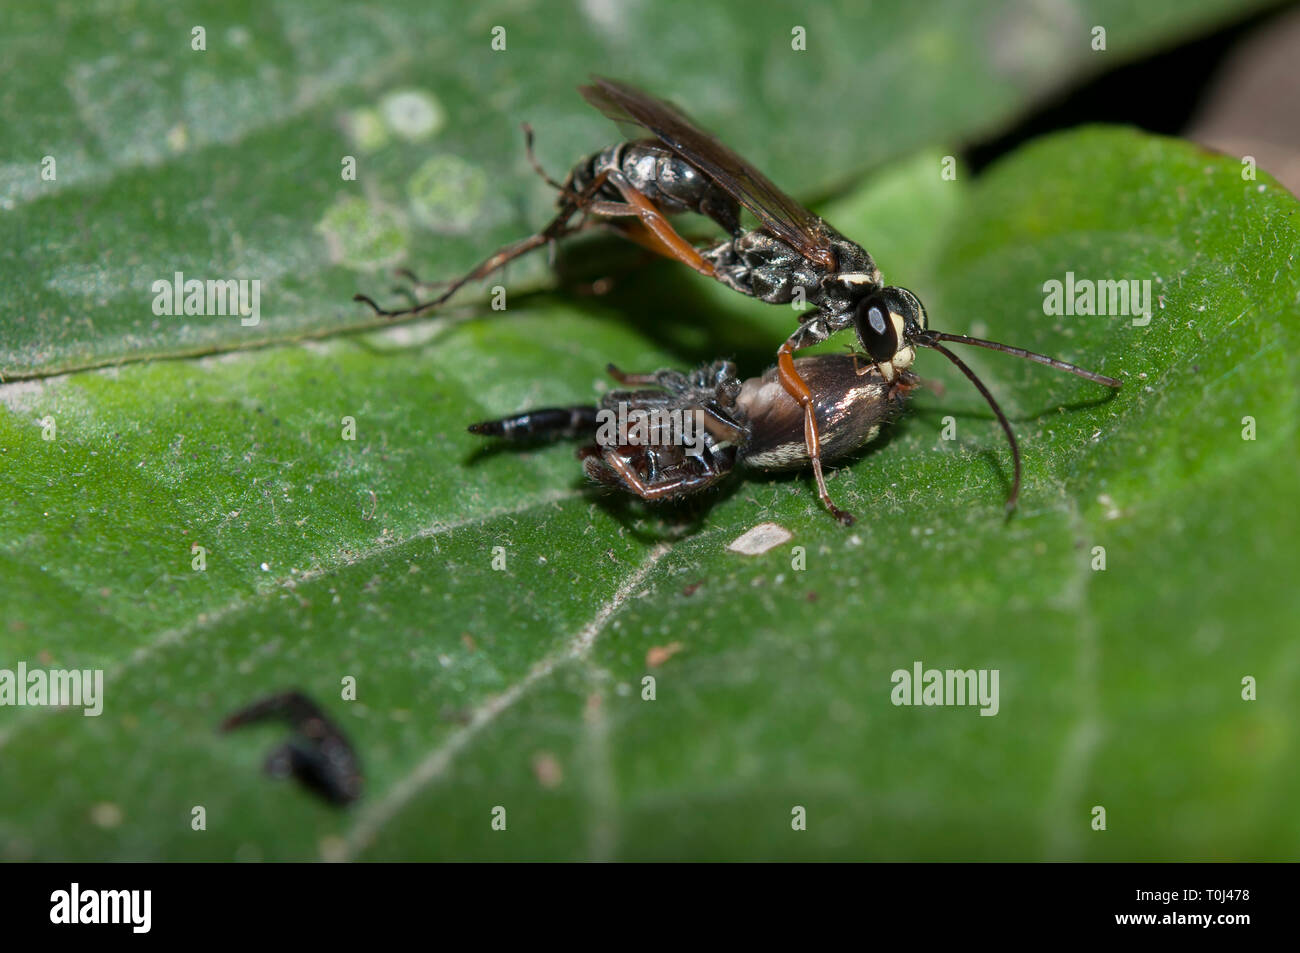 spider-hunting Wasp, Pompilidae Family, with captured Jumping Spider, Salticidae Family, Klungkung, Bali, Indonesia Stock Photo